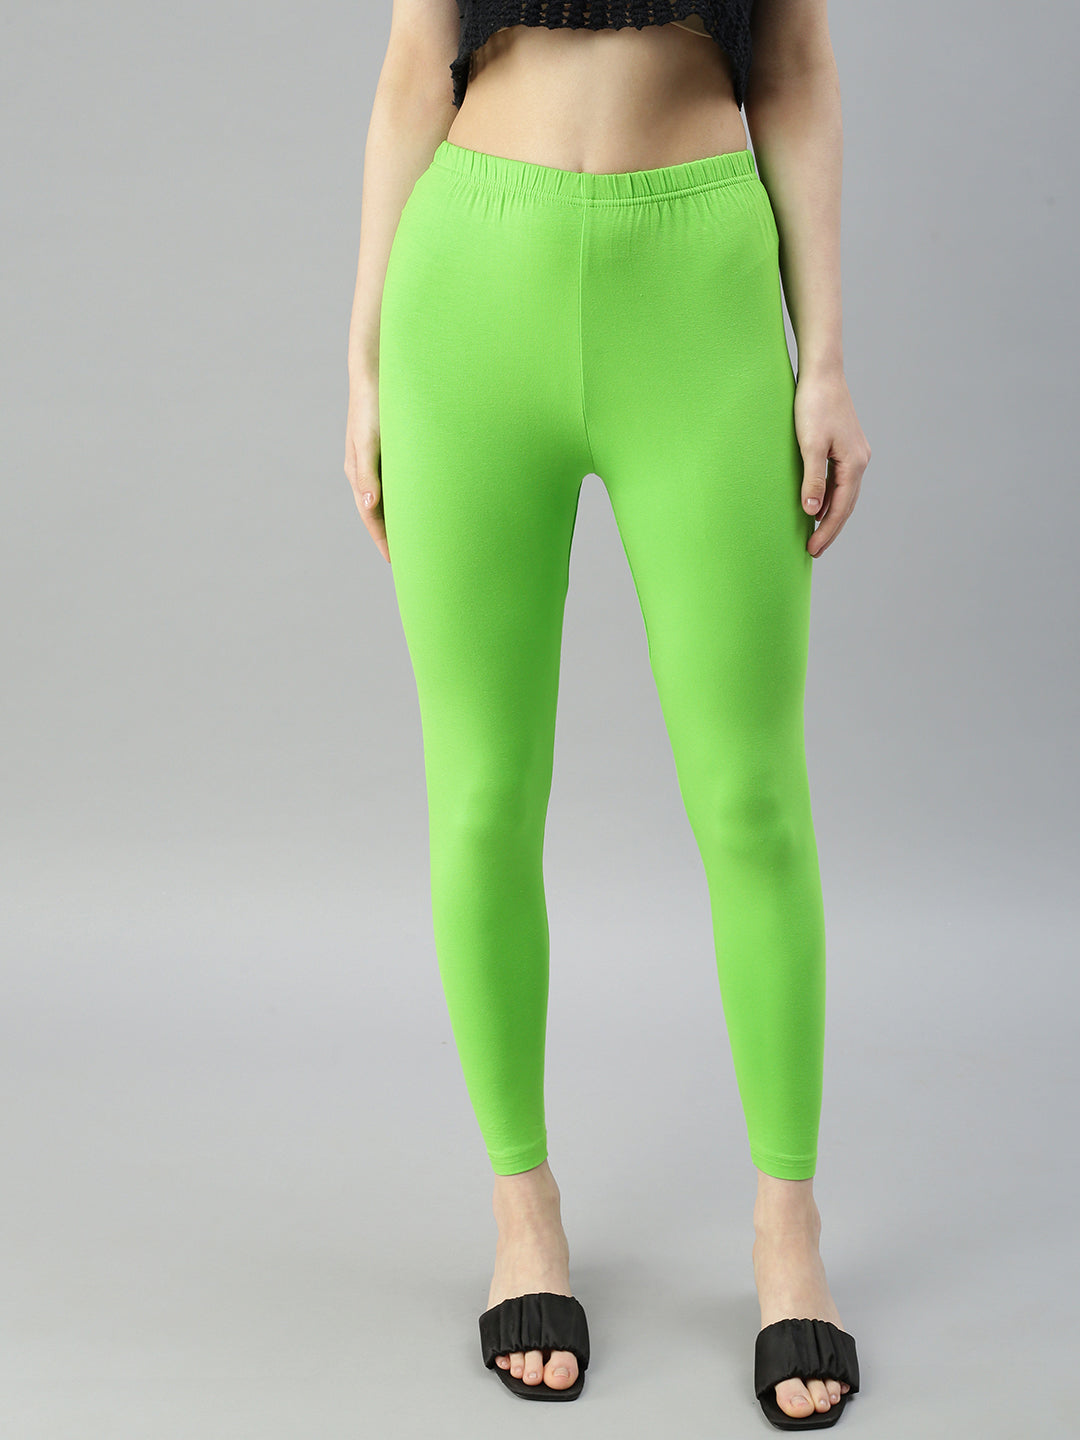 Buy KRYPTIC Women Green Solid Ankle Length Leggings (XXL ;Parrot Green) at  Amazon.in